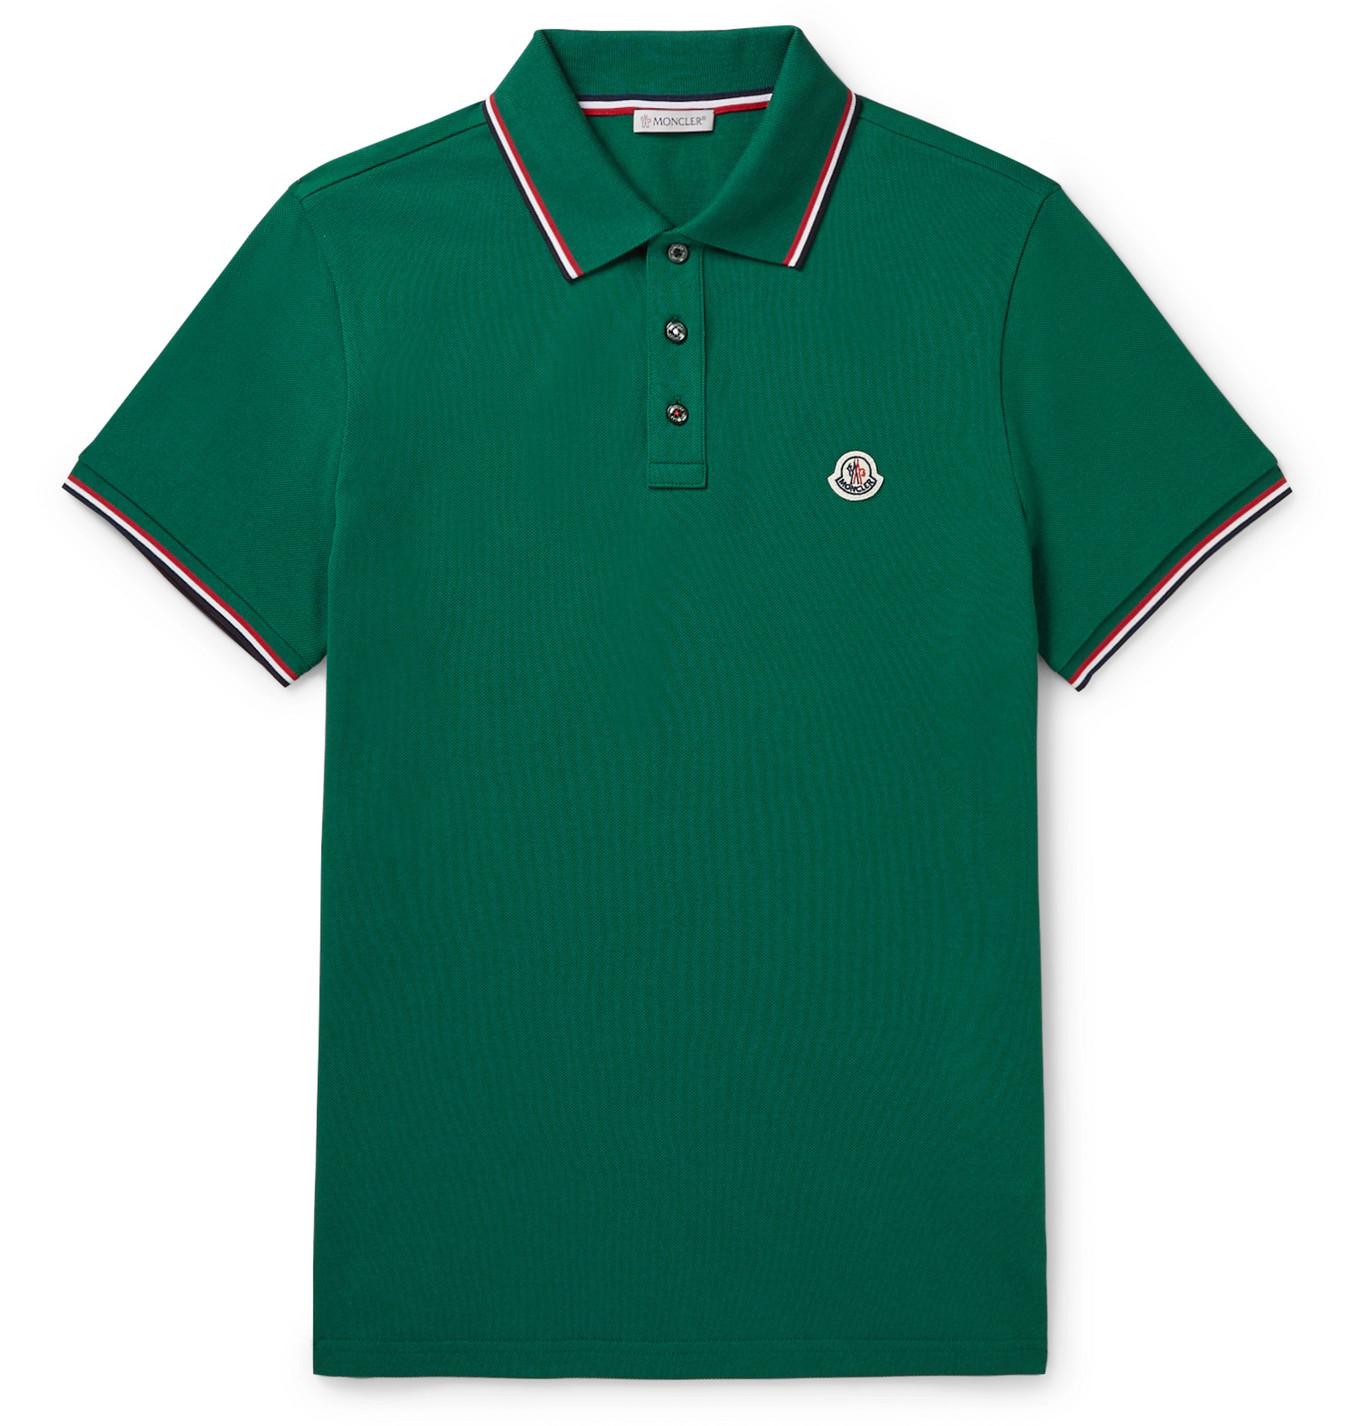 Moncler Contrast-tipped Cotton-piqué Polo Shirt in Green for Men - Lyst